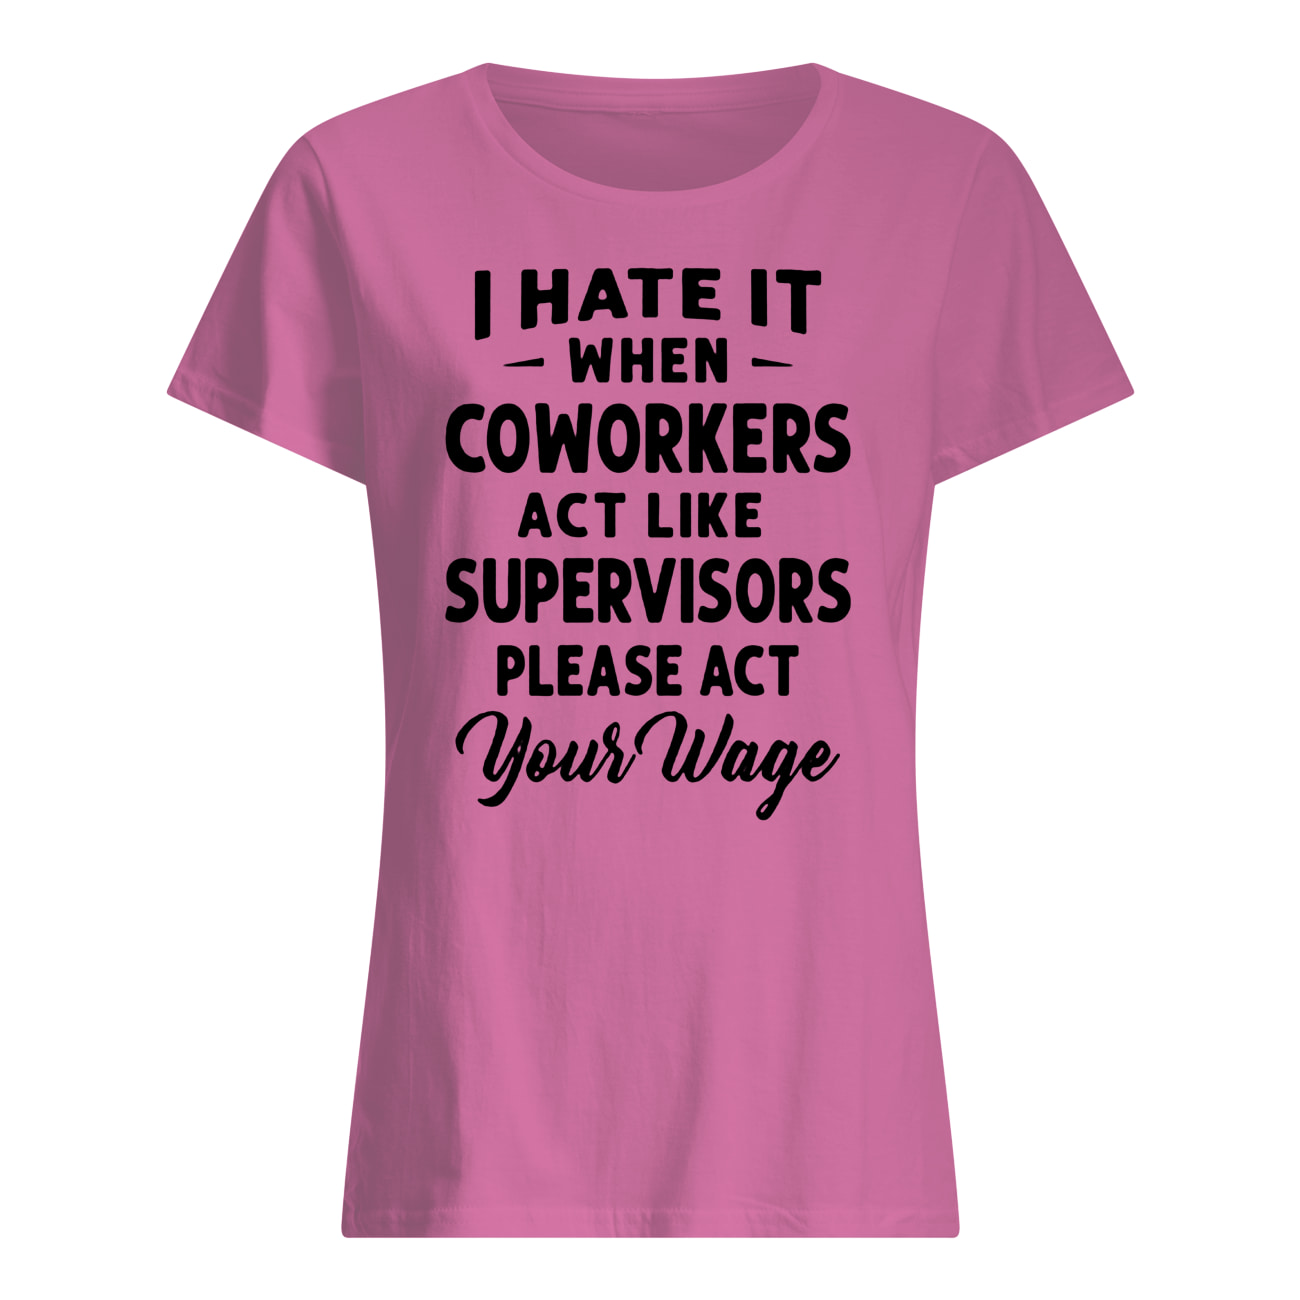 I hate it when coworkers act like supervisors please act your wage womens shirt